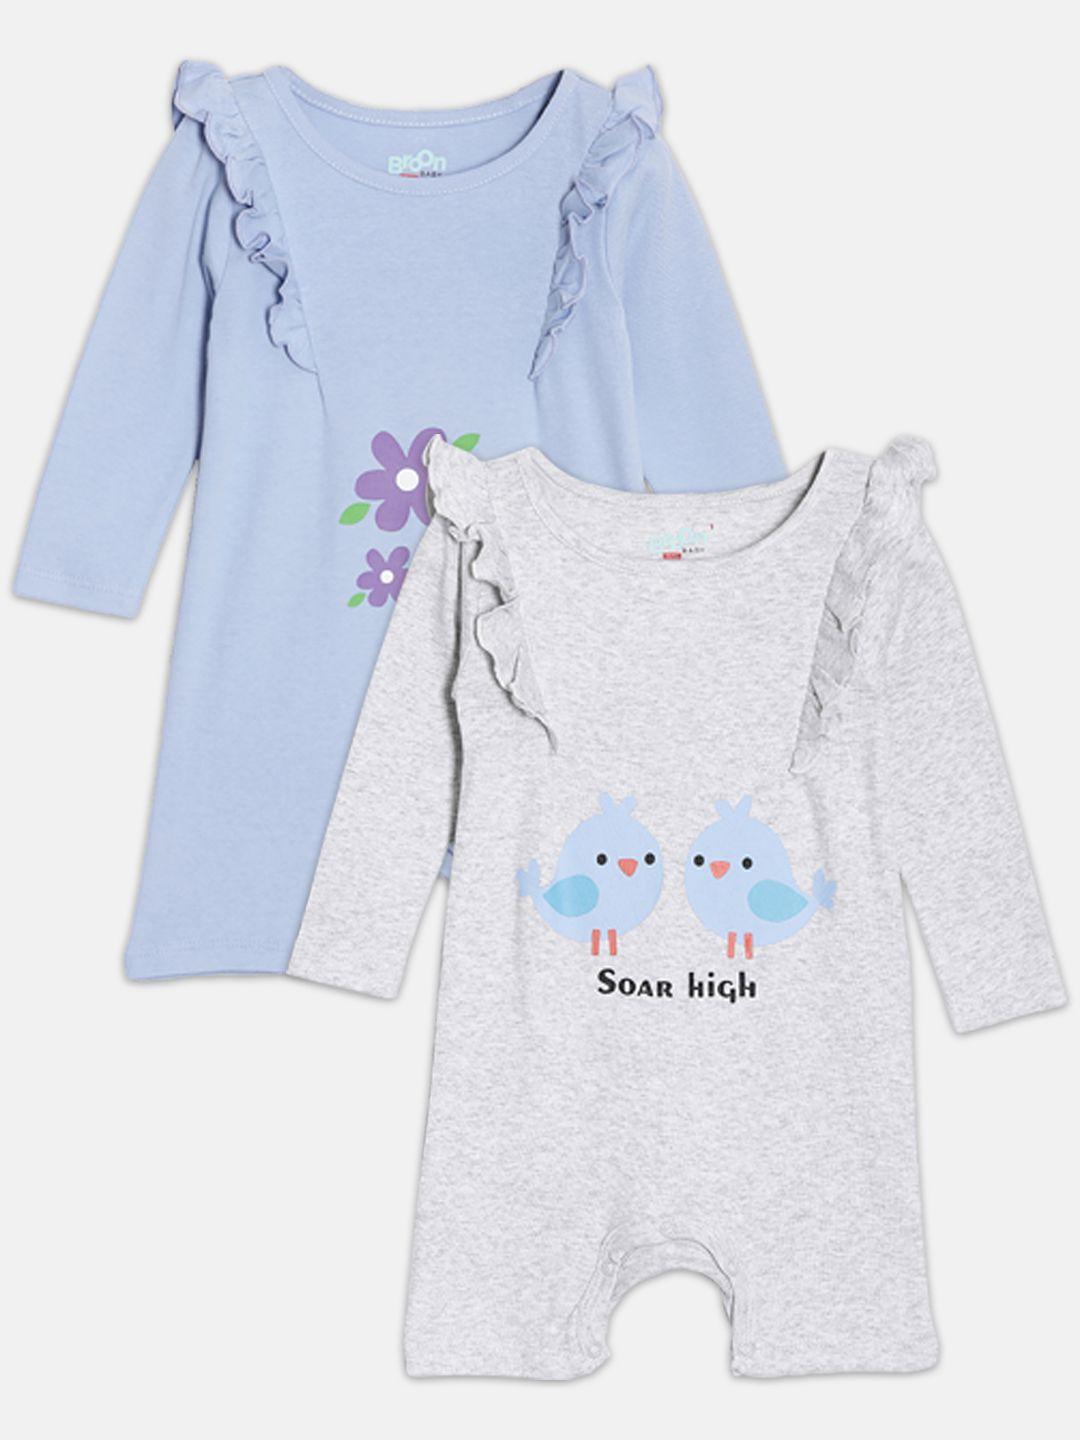 Broon Girls Grey & Blue Pack of 2 Printed Organic Cotton Rompers